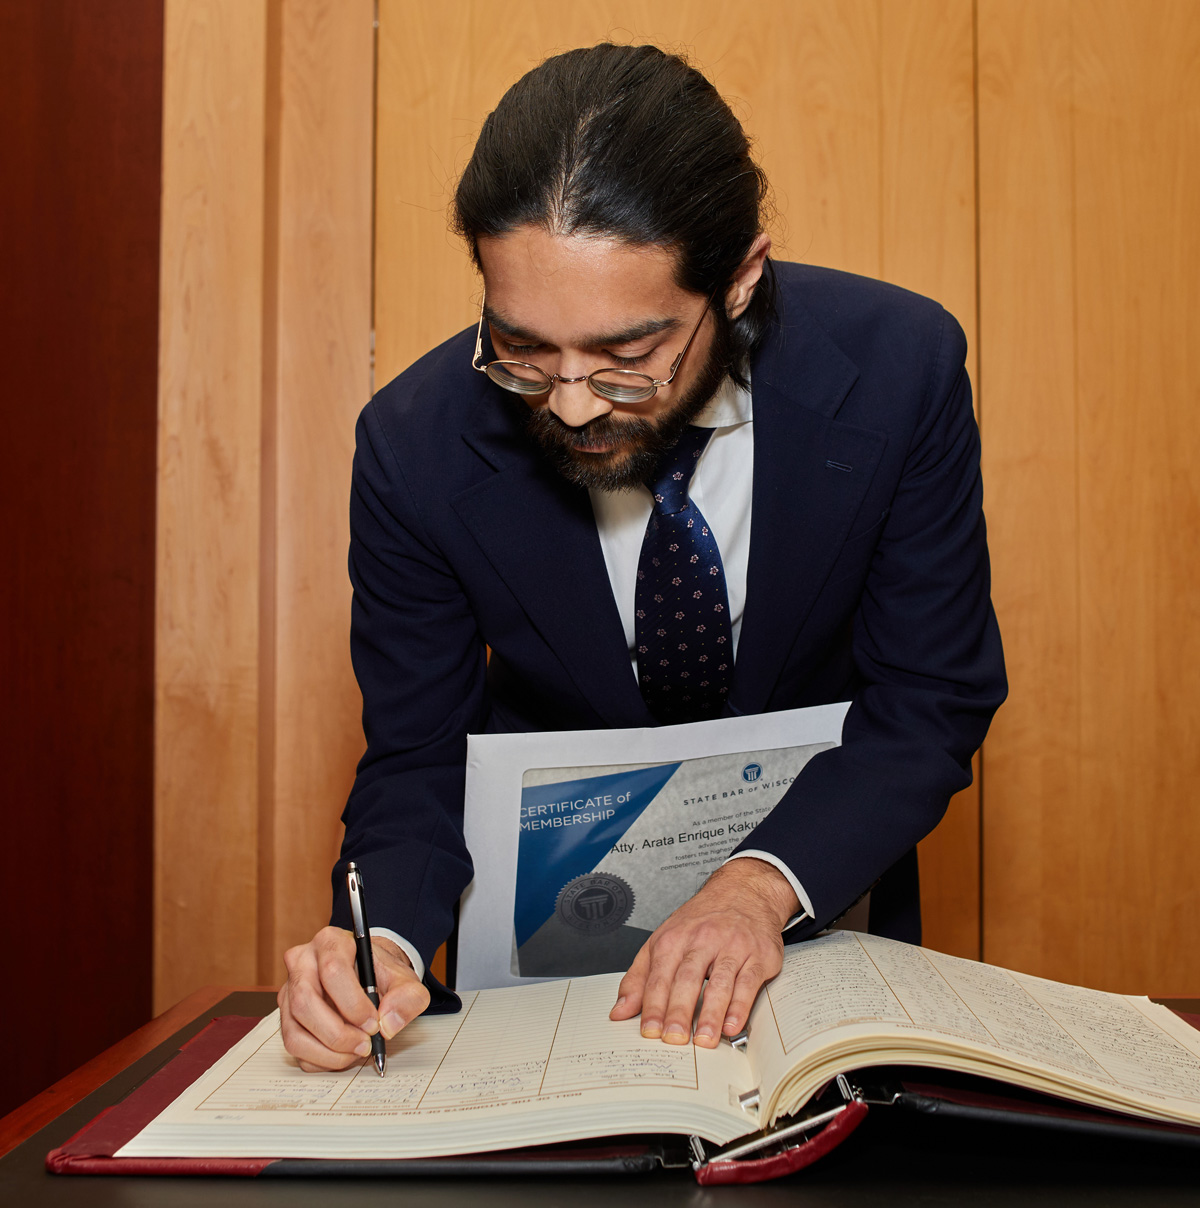 a man is bent over a book, signing his name